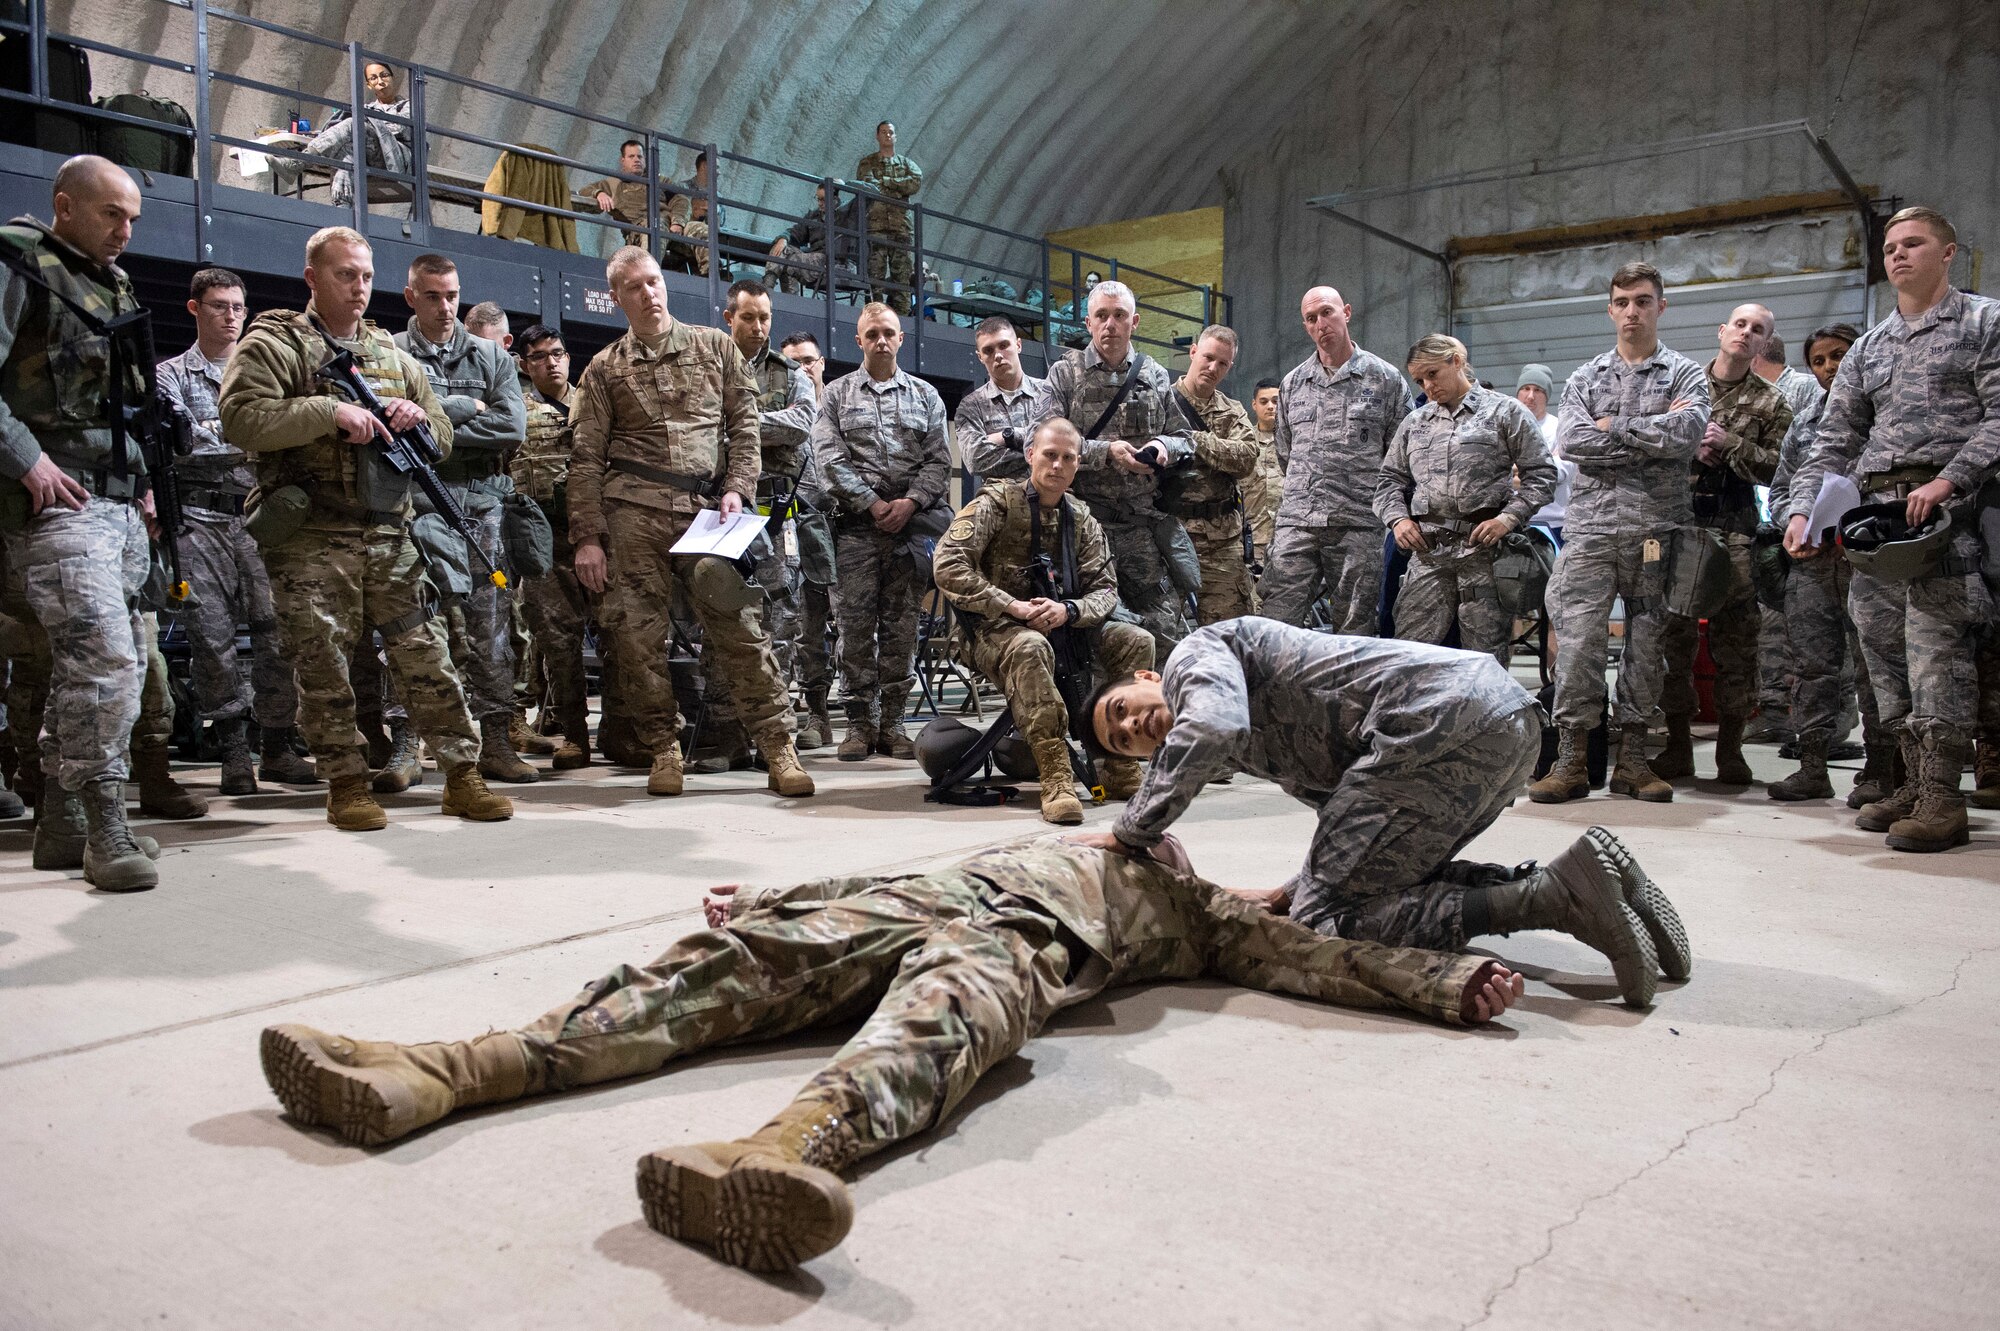 U.S. Air Force Staff Sgt. Rafael Ibarra, a 673rd Medical Group medic, performs a simulated casualty assessment while instructing Tactical Combat Casualty Care during exercise Polar Force 20-1, at Joint Base Elmendorf-Richardson, Alaska, Oct. 7, 2019. Designed to test mission readiness, Polar Force is a two-week exercise that develops the skills required to face and overcome adverse scenarios. (U.S. Air Force photo by Alejandro Peña)